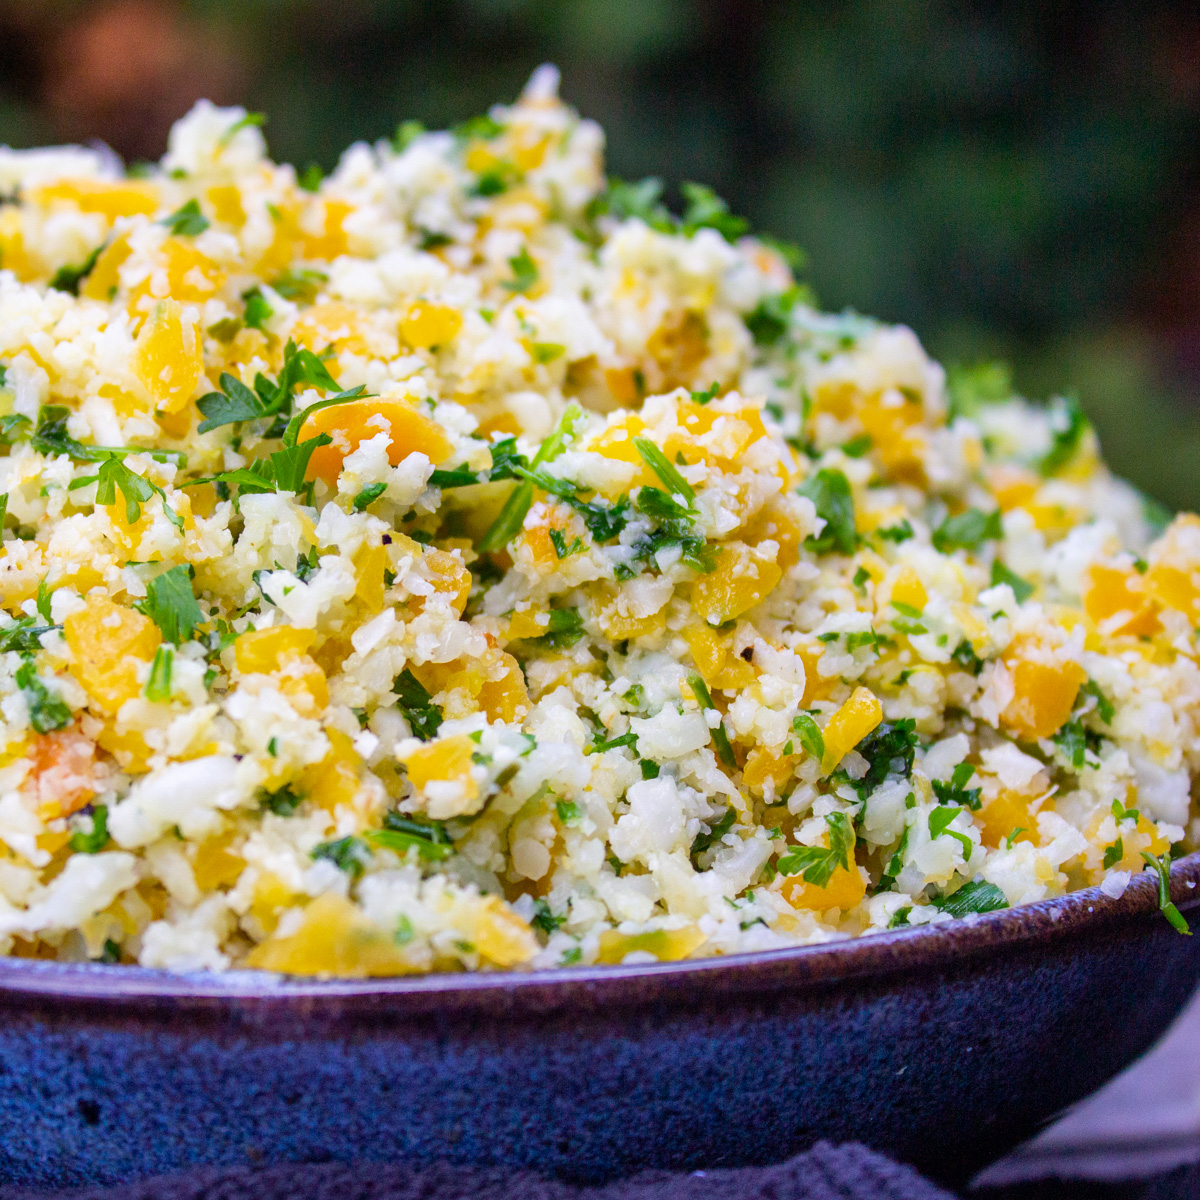 bowl of seasoned cauliflower rice and butternut squash on table.